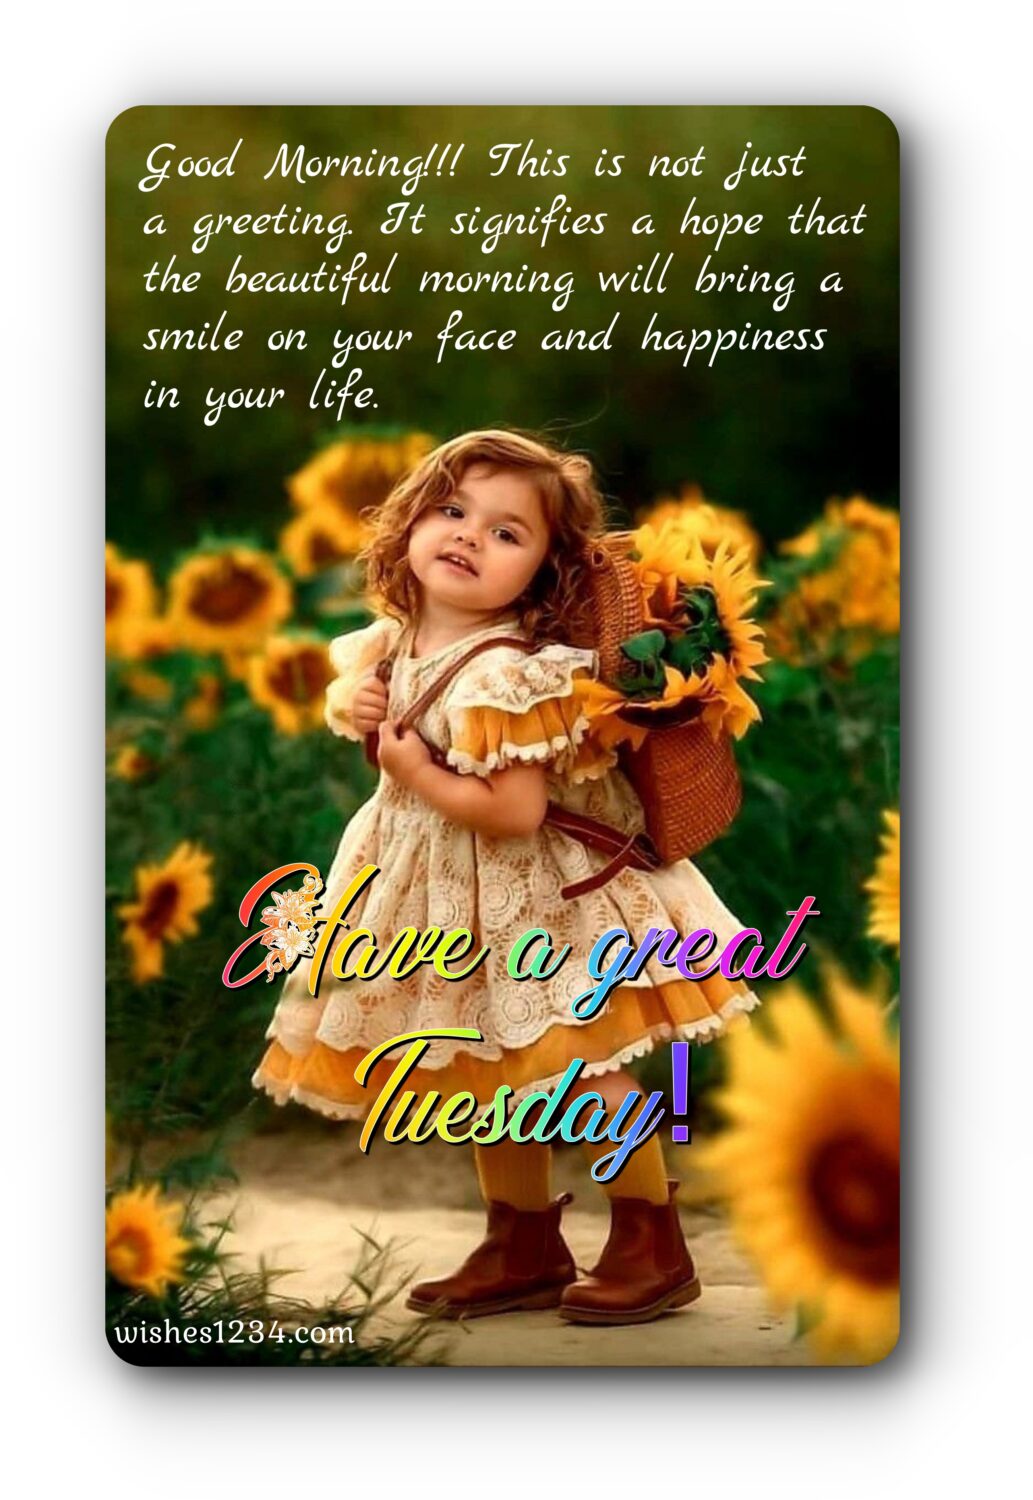 Girl carriying flower back pack, Happy Tuesday Quotes| Tuesday Quotes